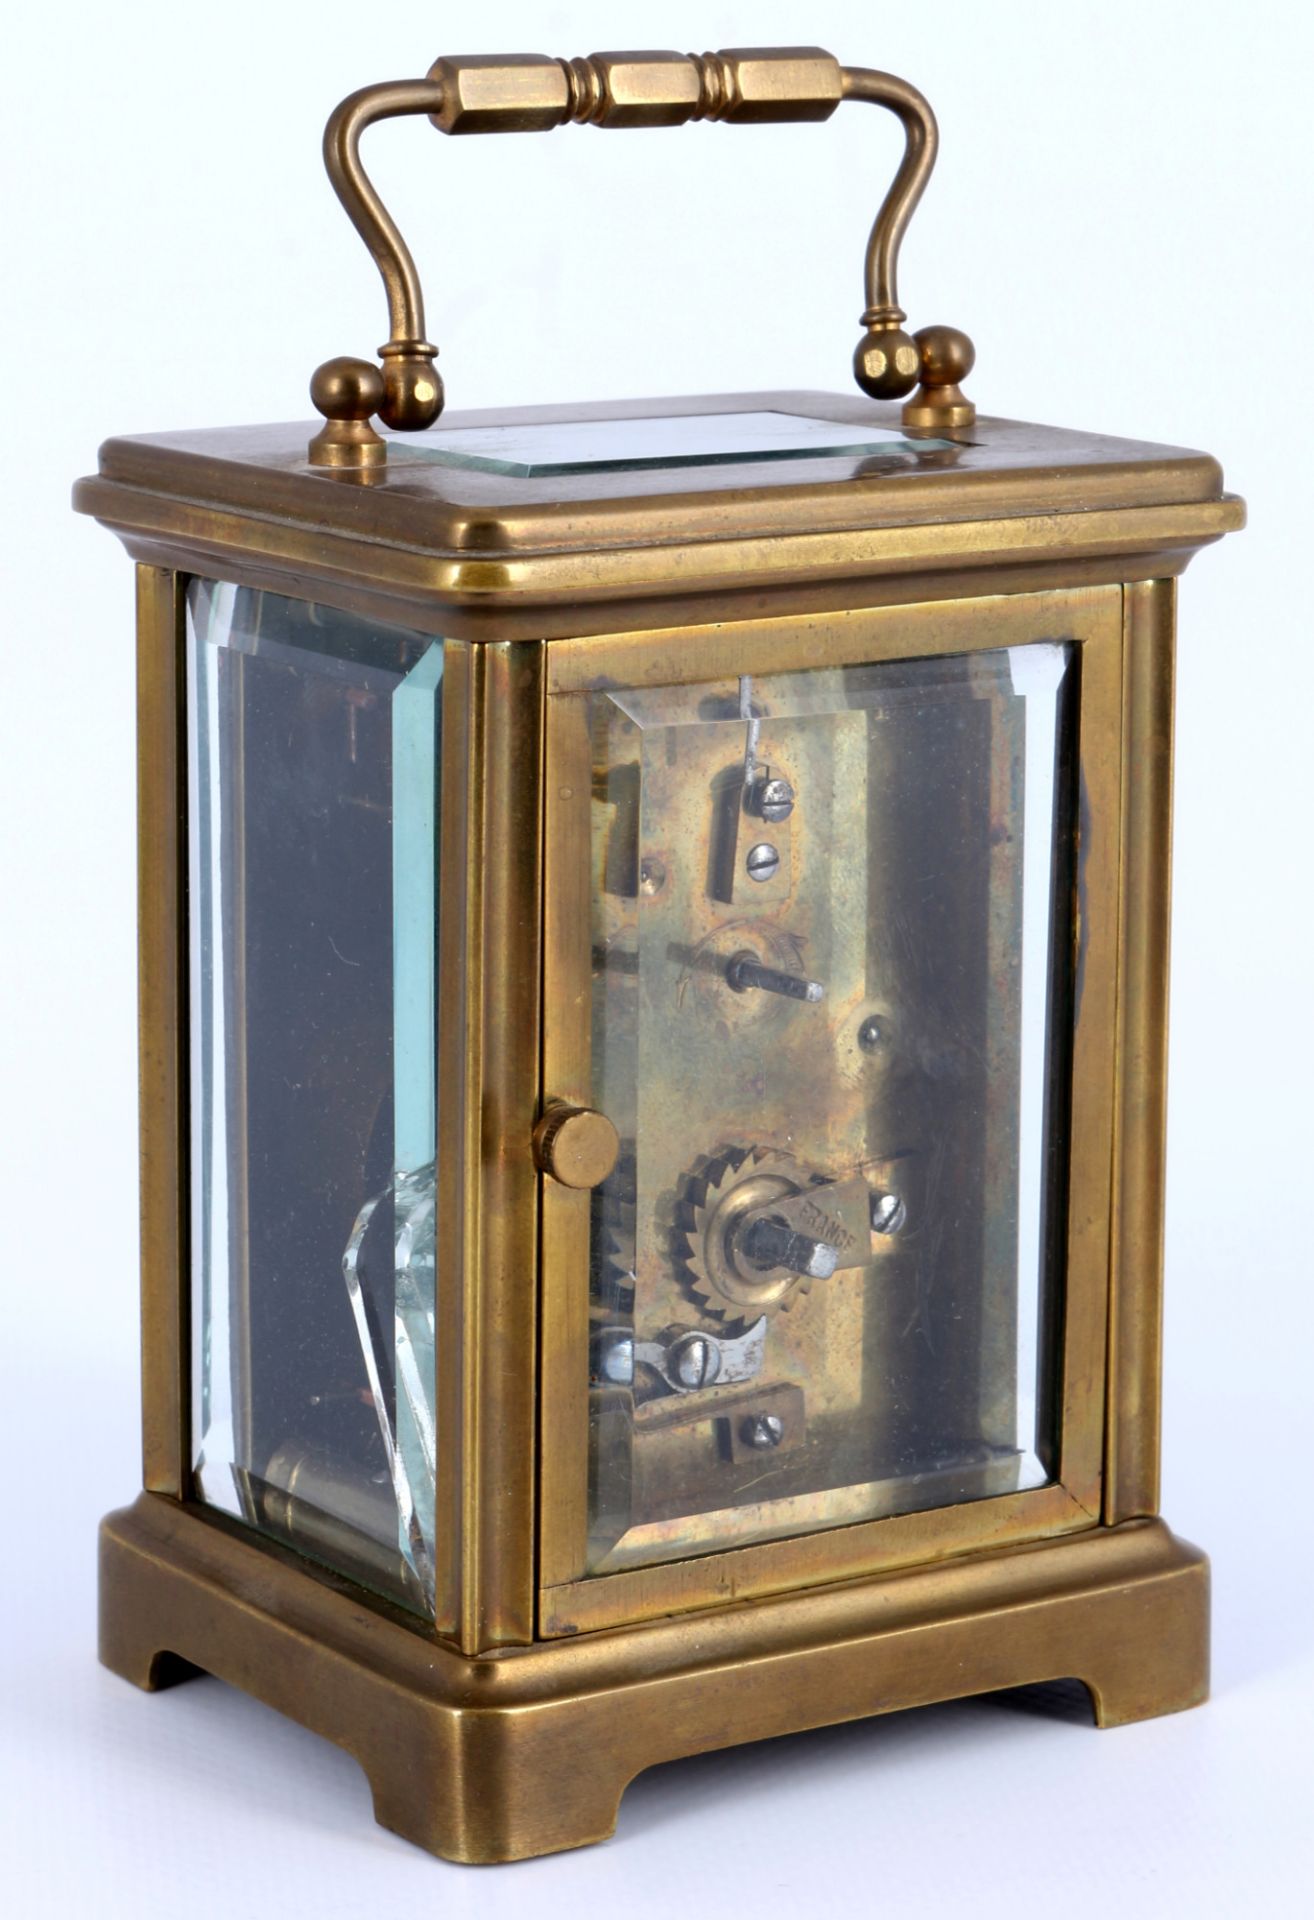 Large Carriage clock, France around 1900, - Image 3 of 6